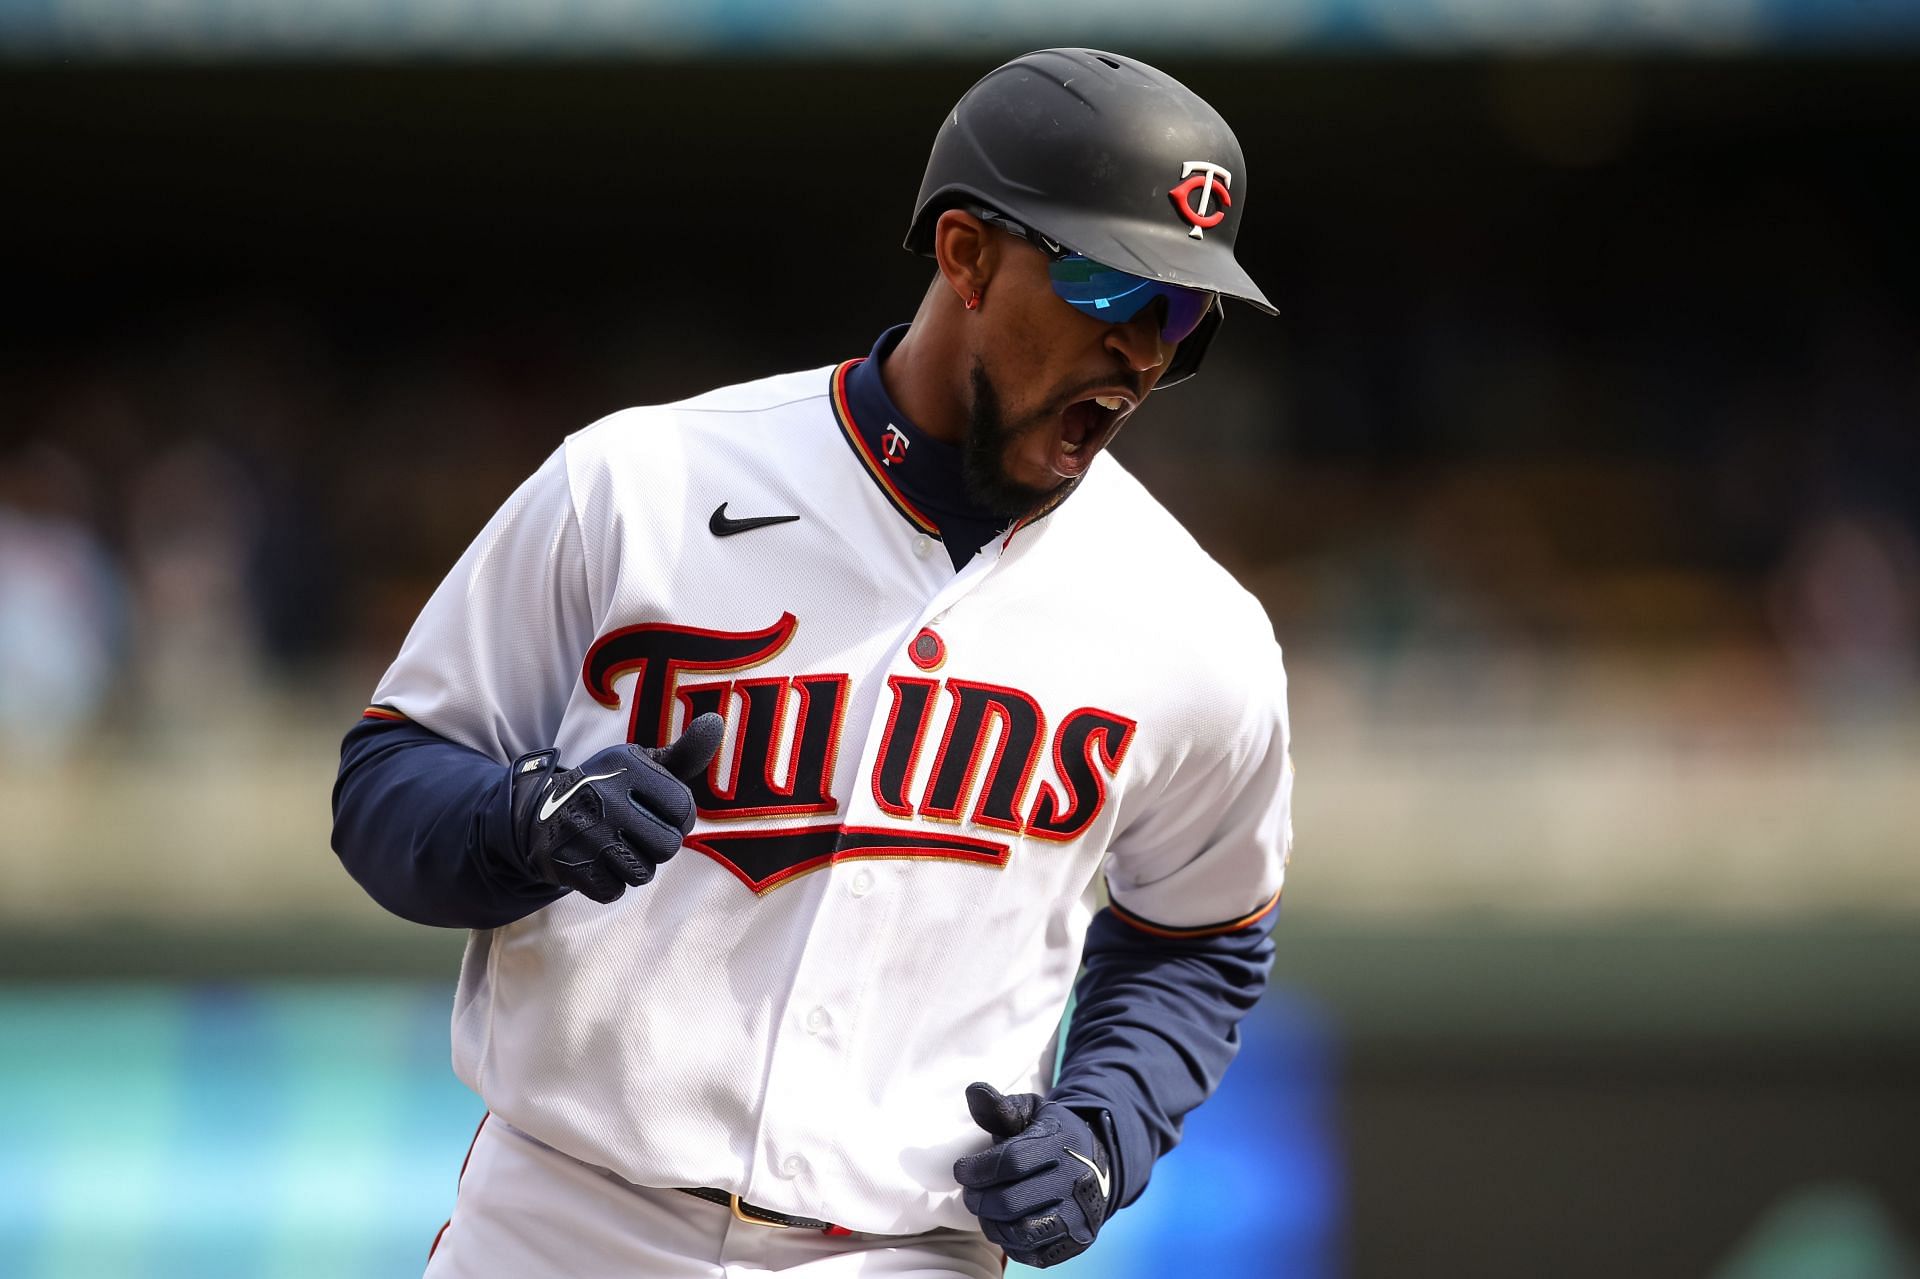 The Minnesota Twins signed Byron Buxton to a 7 year contract extension as part of a plan to build around the five-tool player for the future.